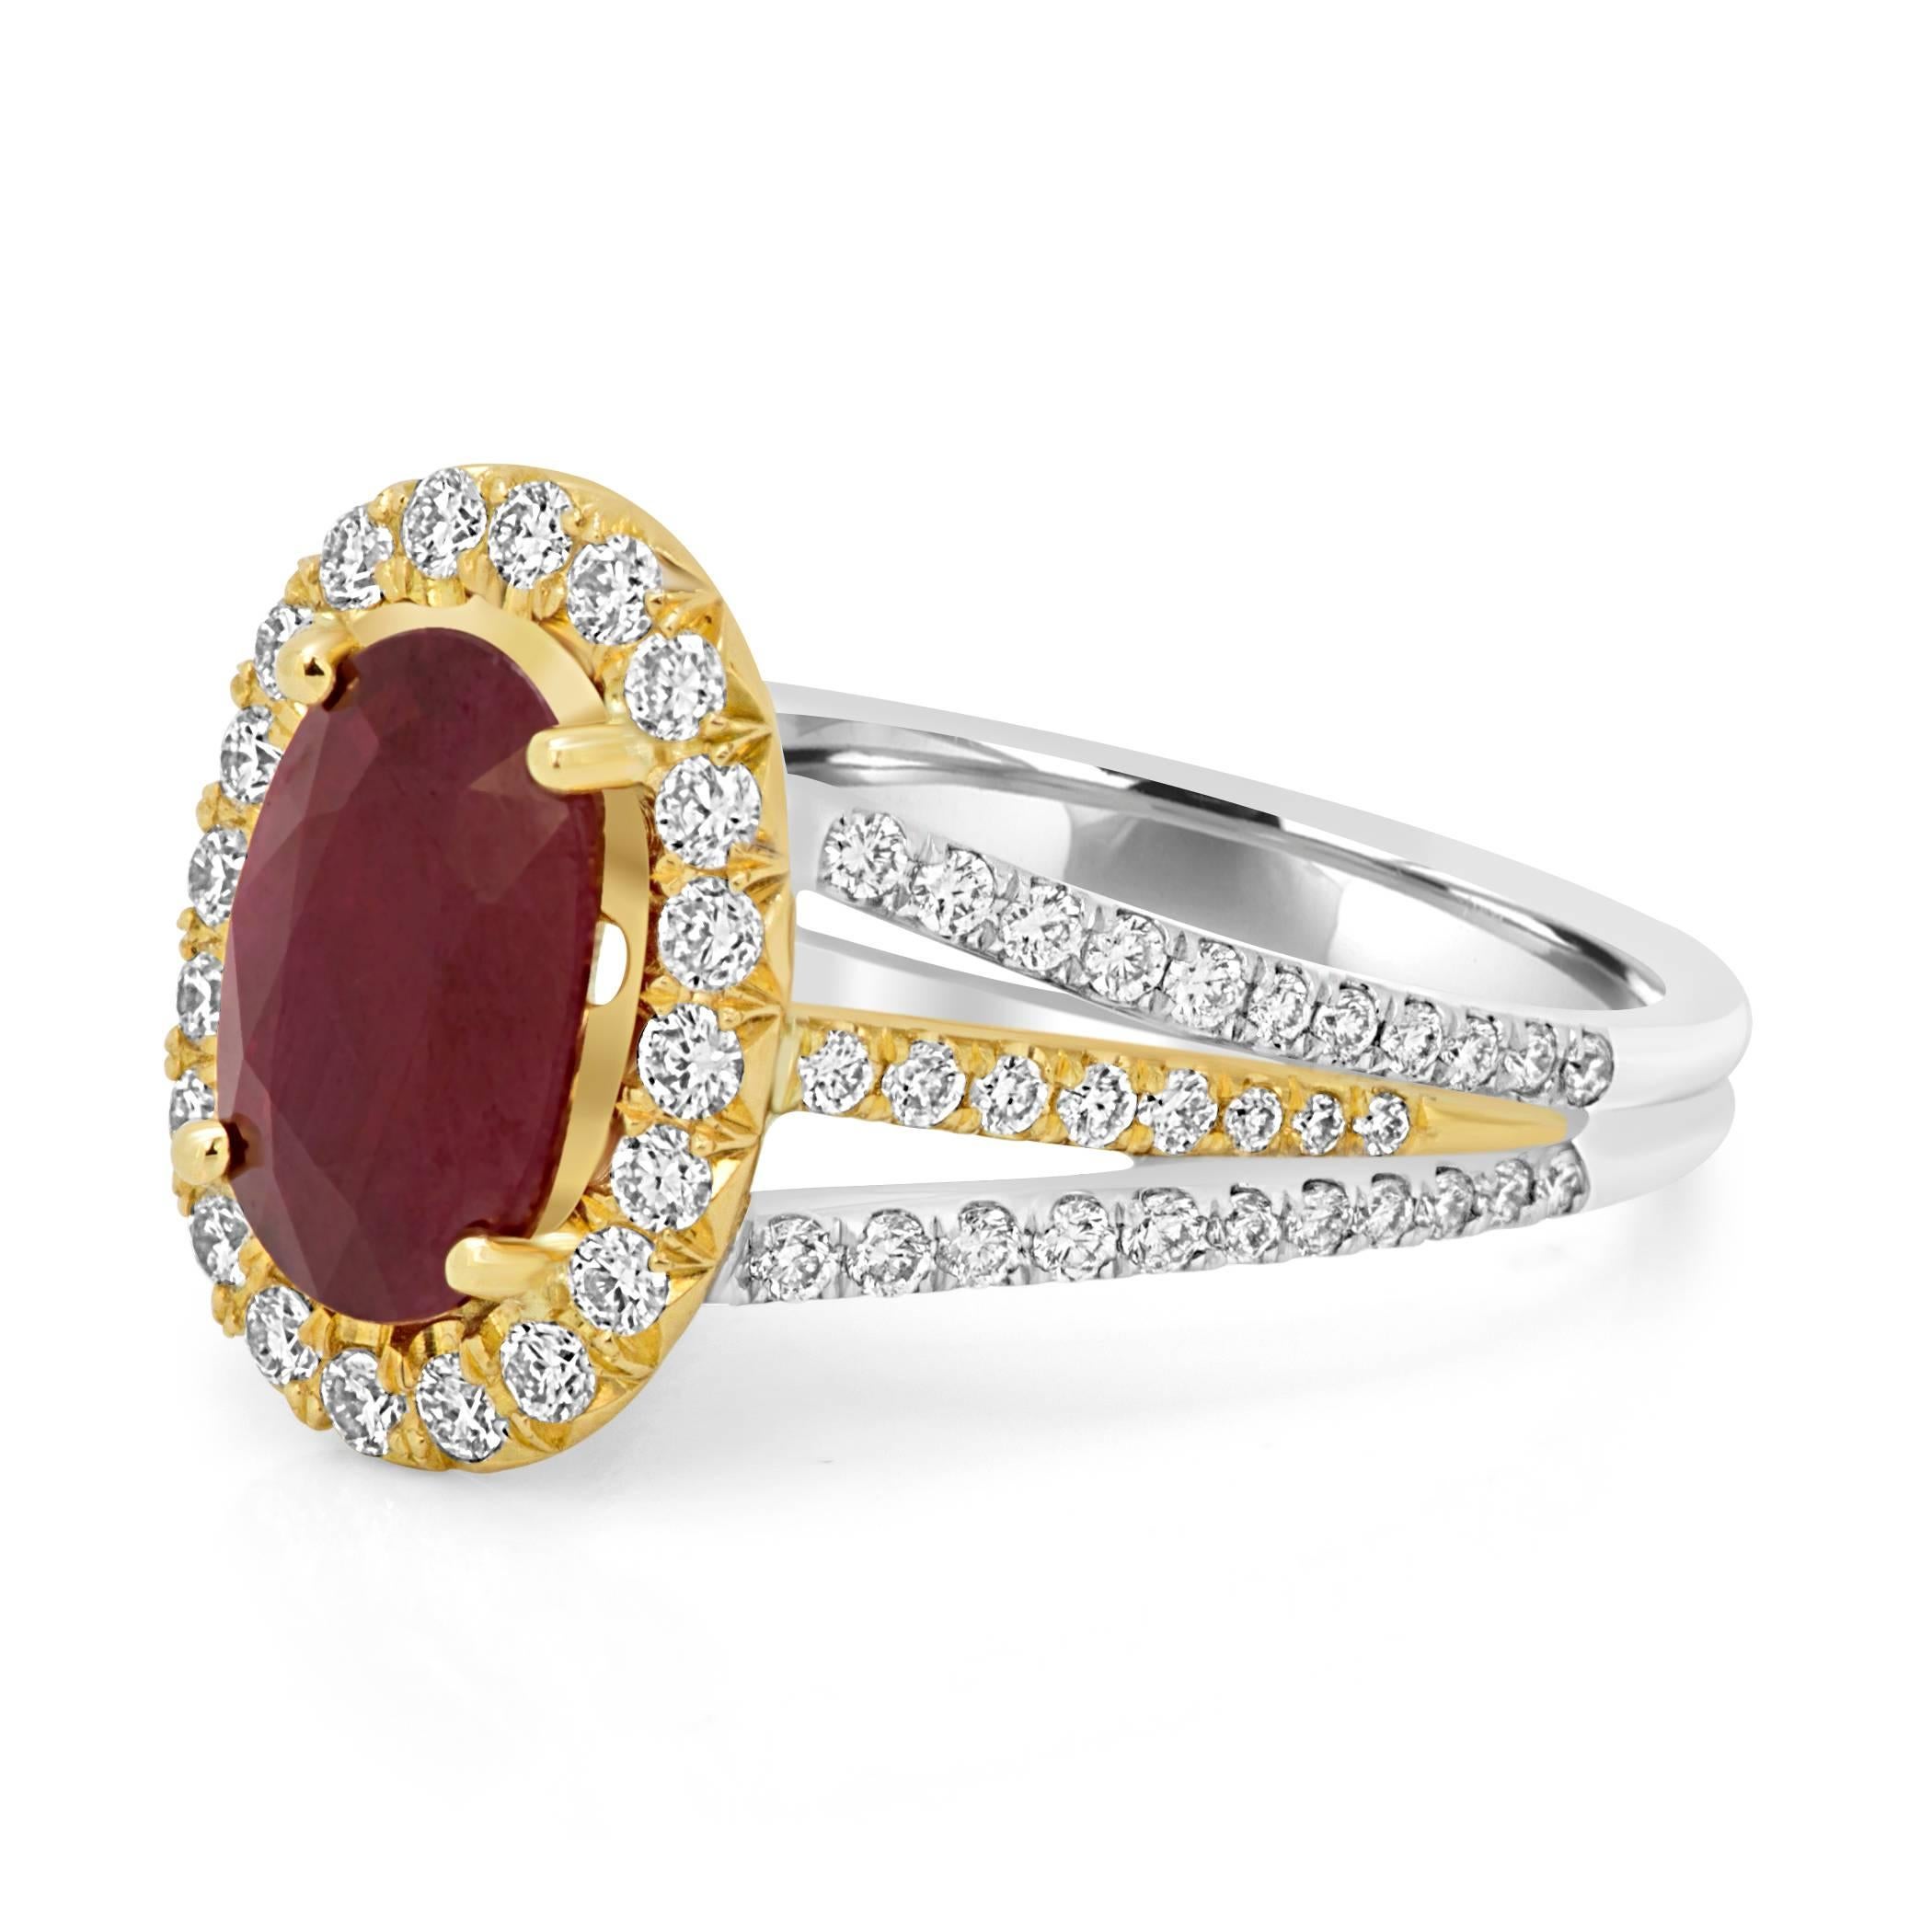 Beautiful GIA Certified Burma Ruby Oval 2.33 Carat Encircled in a single Halo of white Round Diamonds 0.75 Carat in 18K White and Yellow Gold Three Prong Shank Classic Bridal Fashion Cocktail Ring.

Style available in different price ranges. Prices